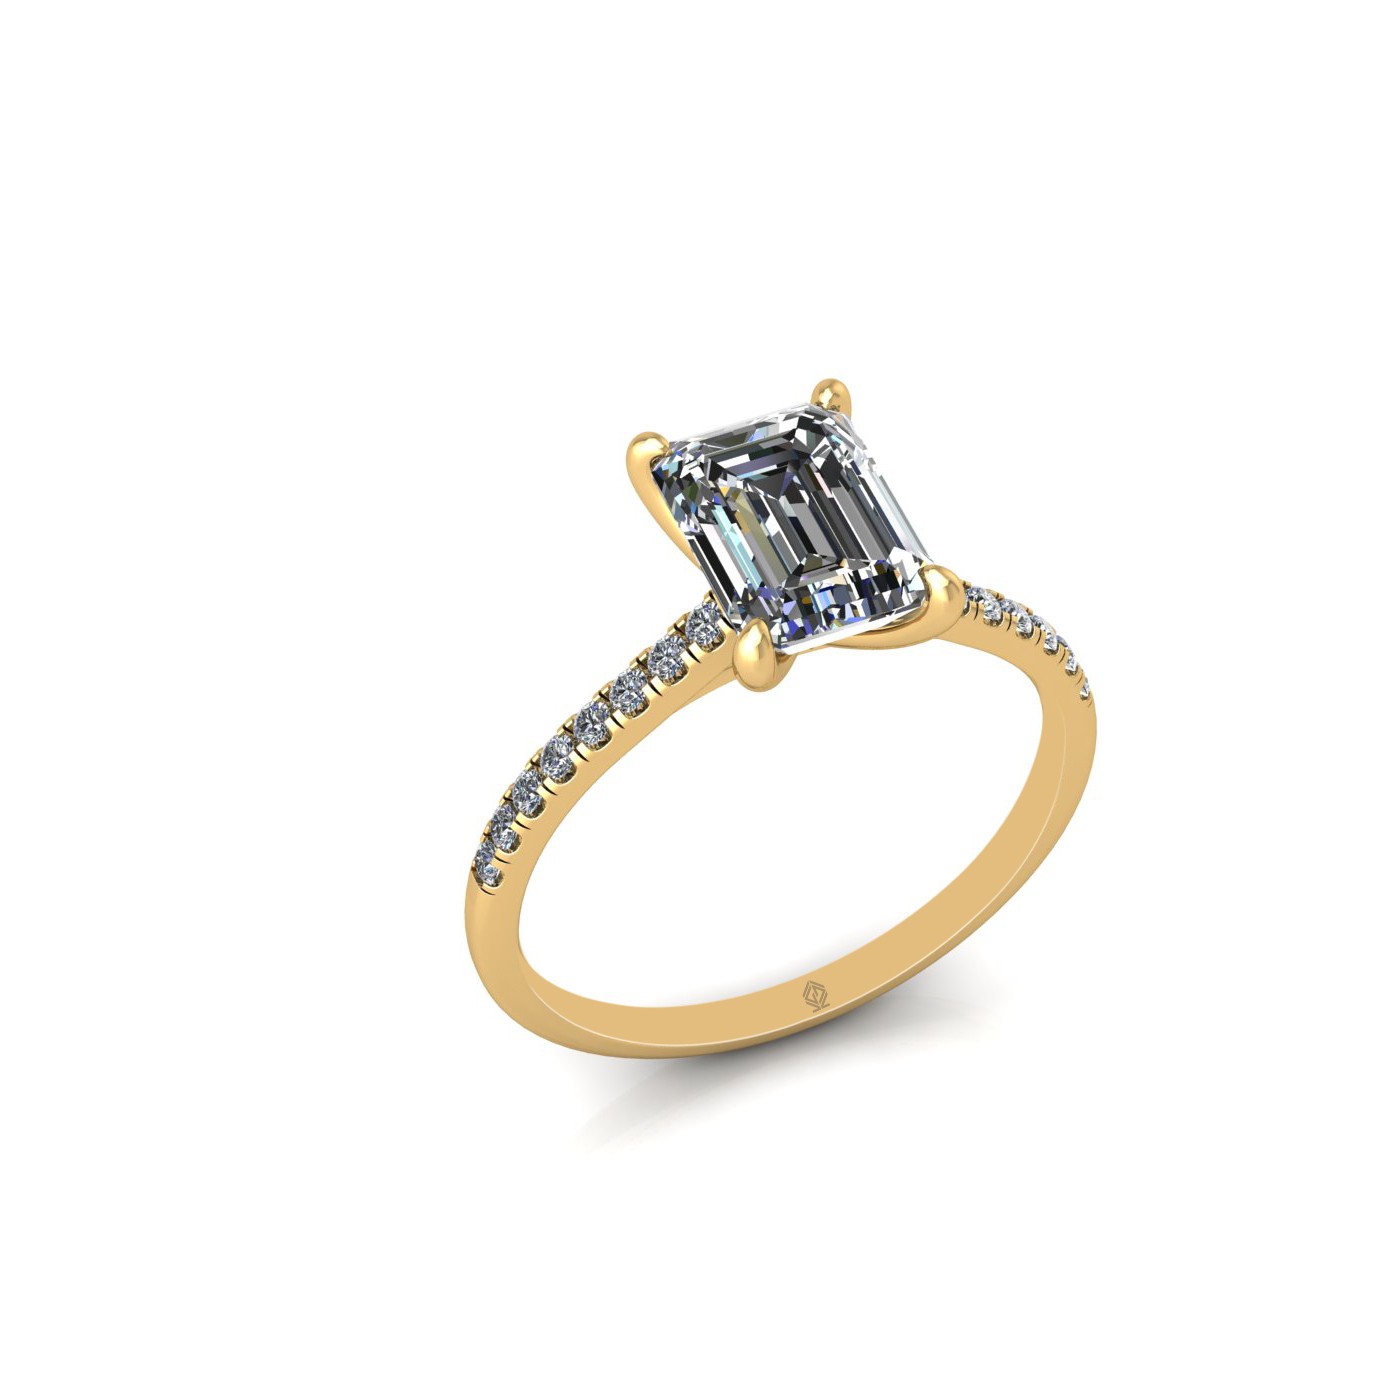 18k yellow gold 1.5ct 4 prongs emerald cut diamond engagement ring with whisper thin pavÉ set band